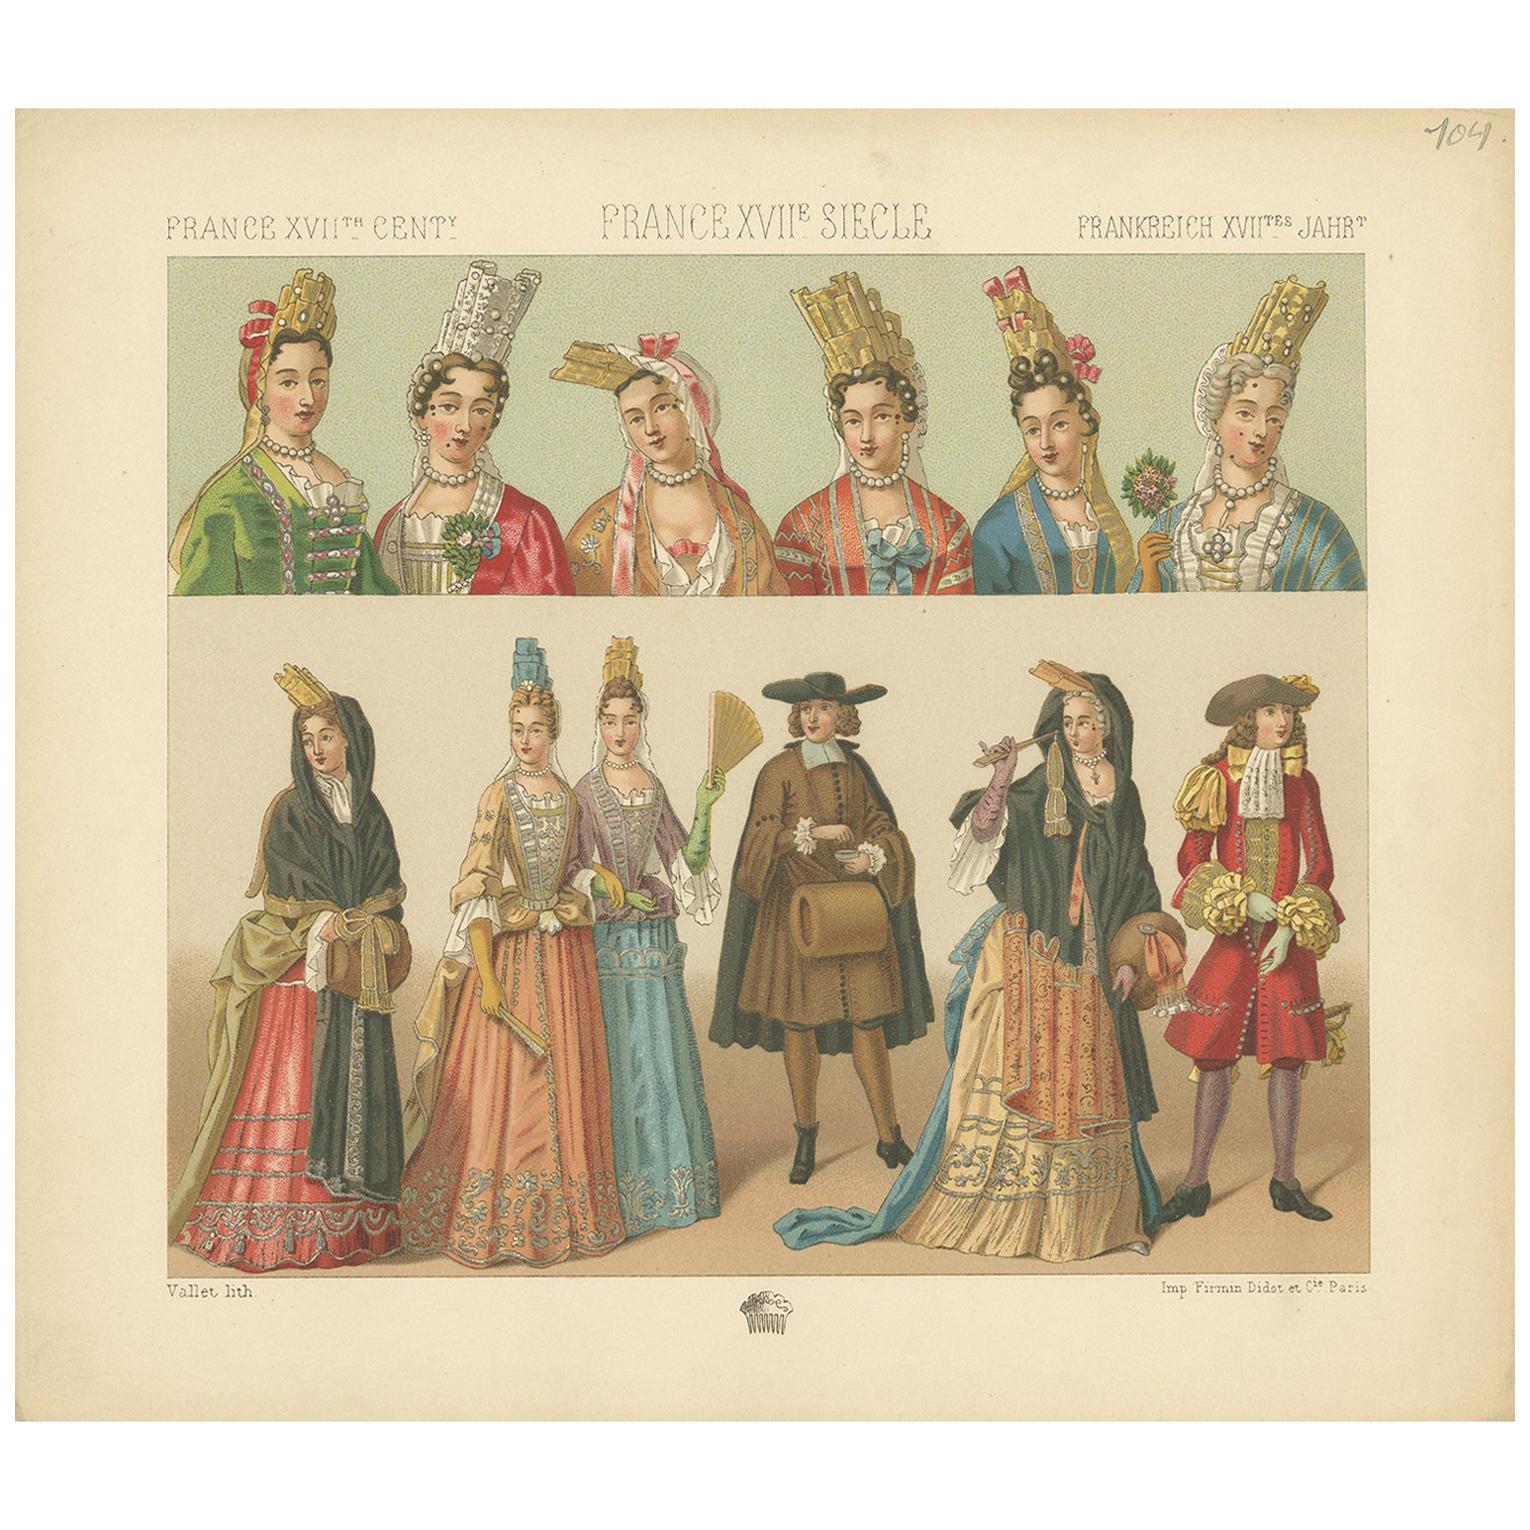 Pl. 104 Antique Print of French 17th Century Costumes by Racinet, circa 1880